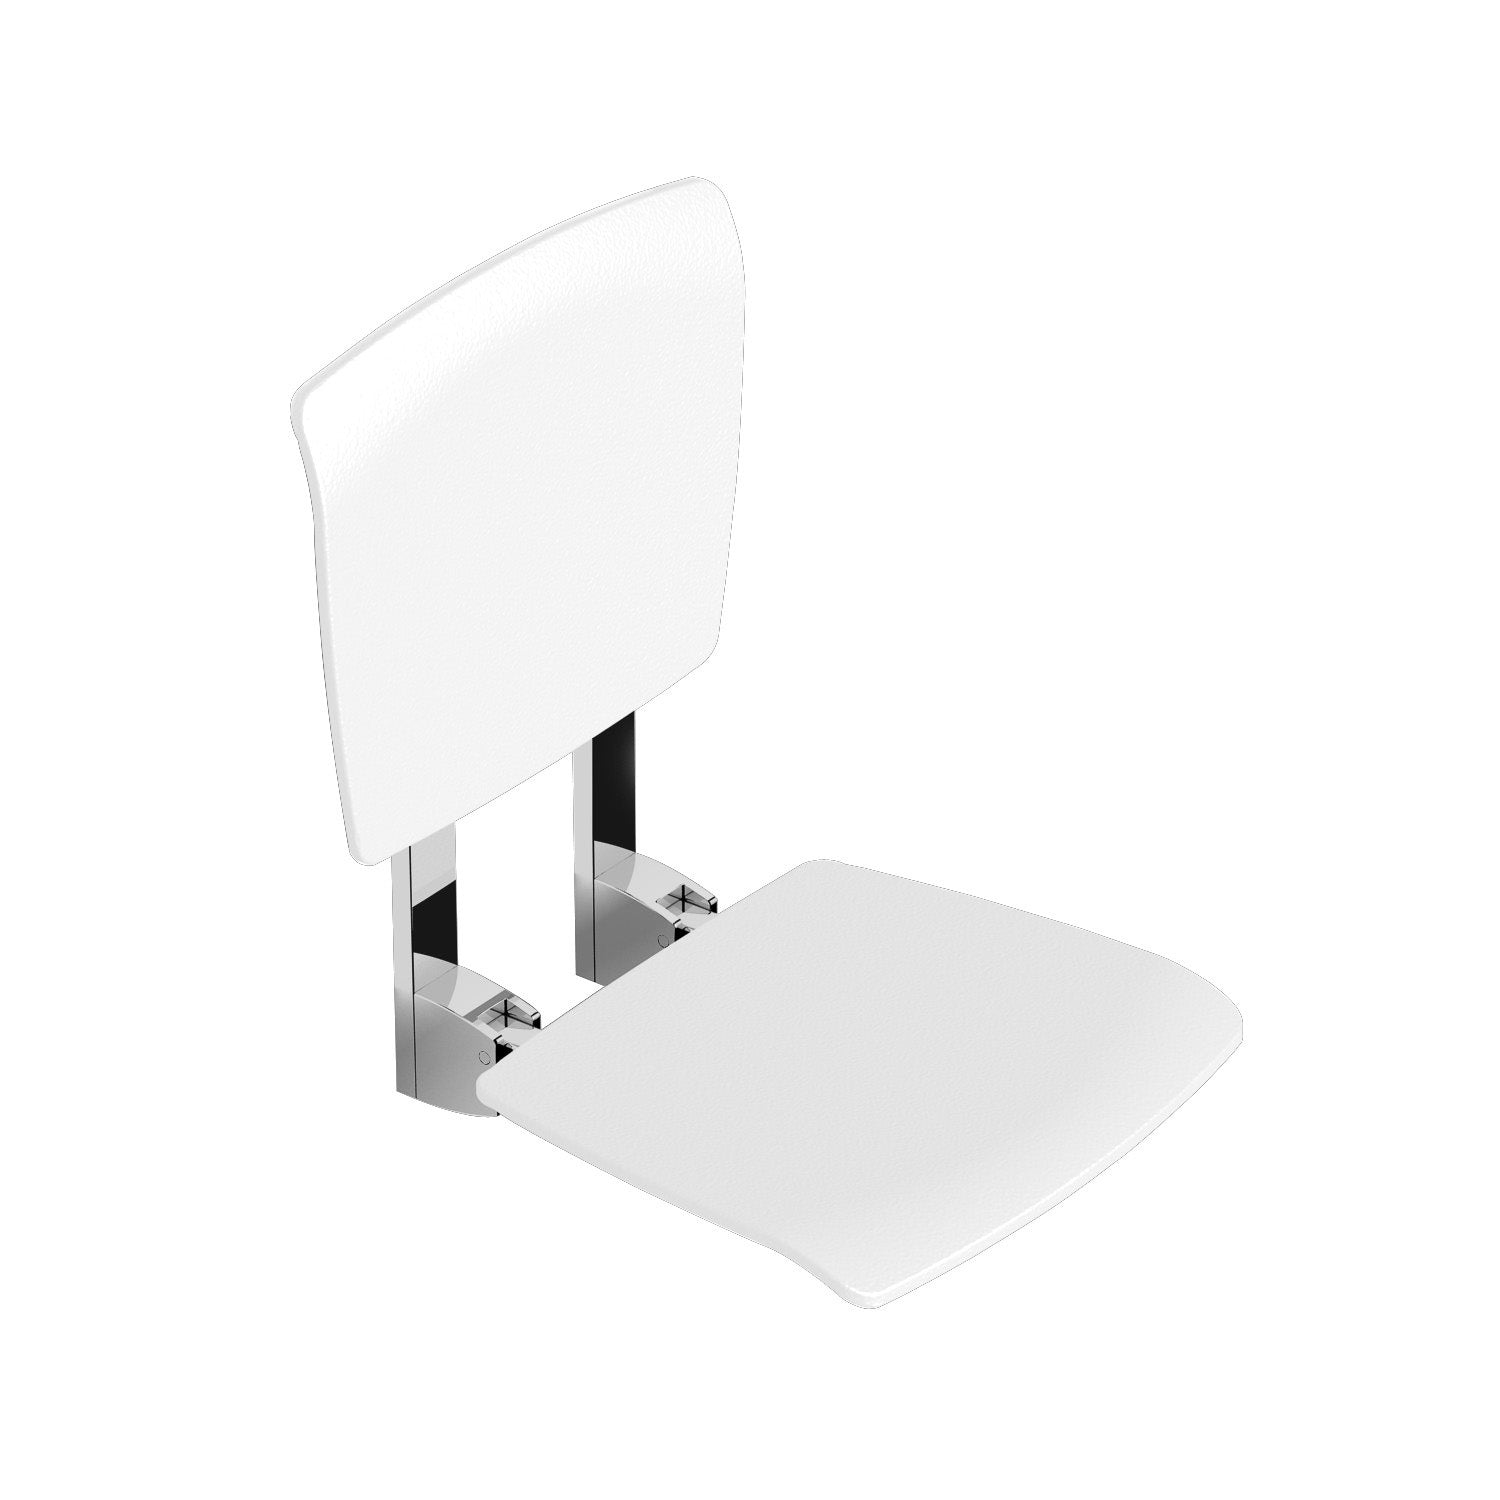 Esense Fixed Shower Seat and backrest with a white finish on a white background